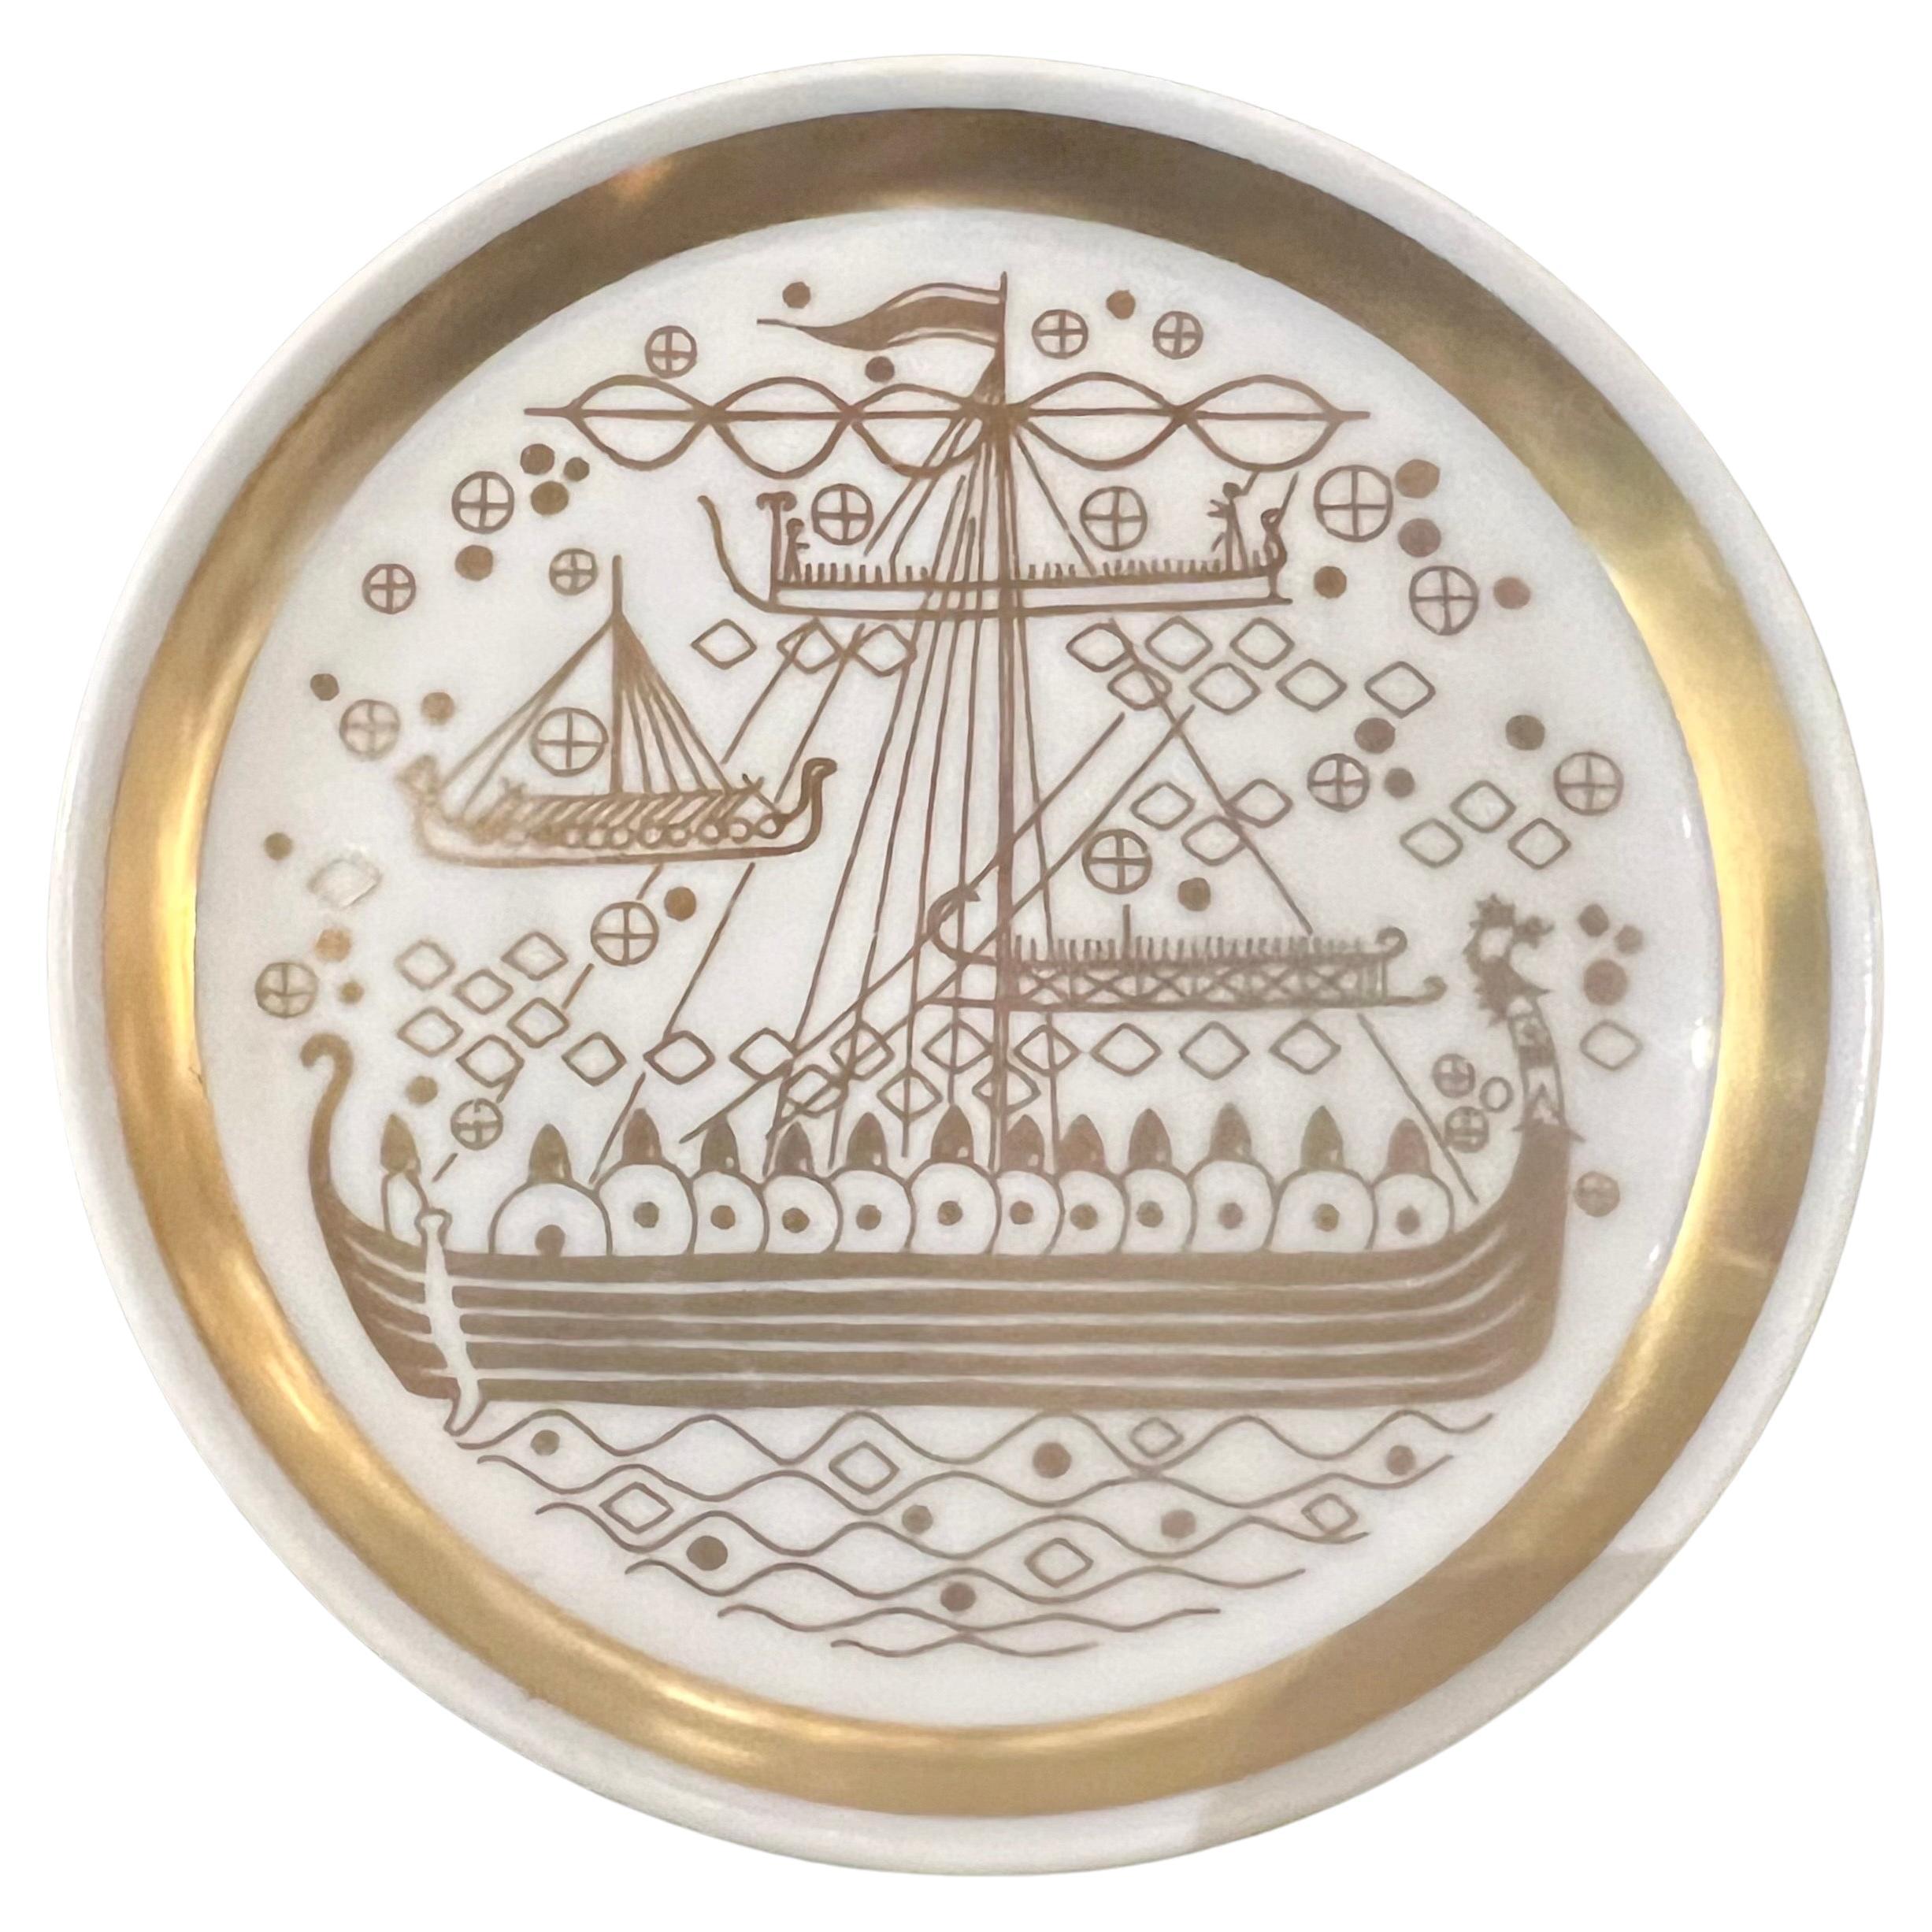 Beautiful small porcelain decorative plate in gold leaf, beautiful Viking ship circa 1950s no chips or cracks.